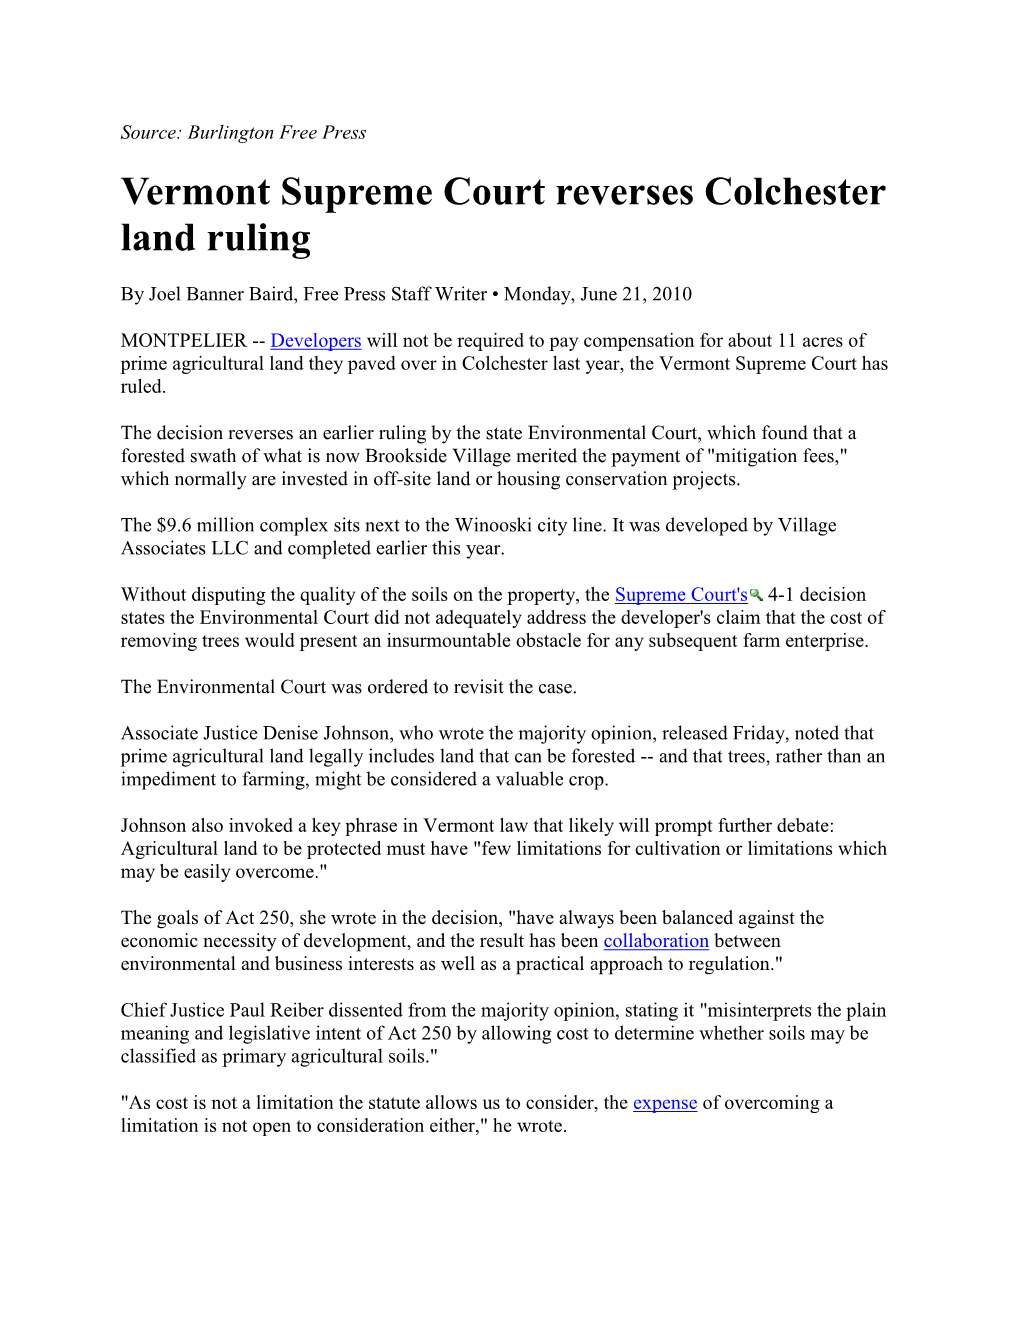 Vermont Supreme Court Reverses Colchester Land Ruling